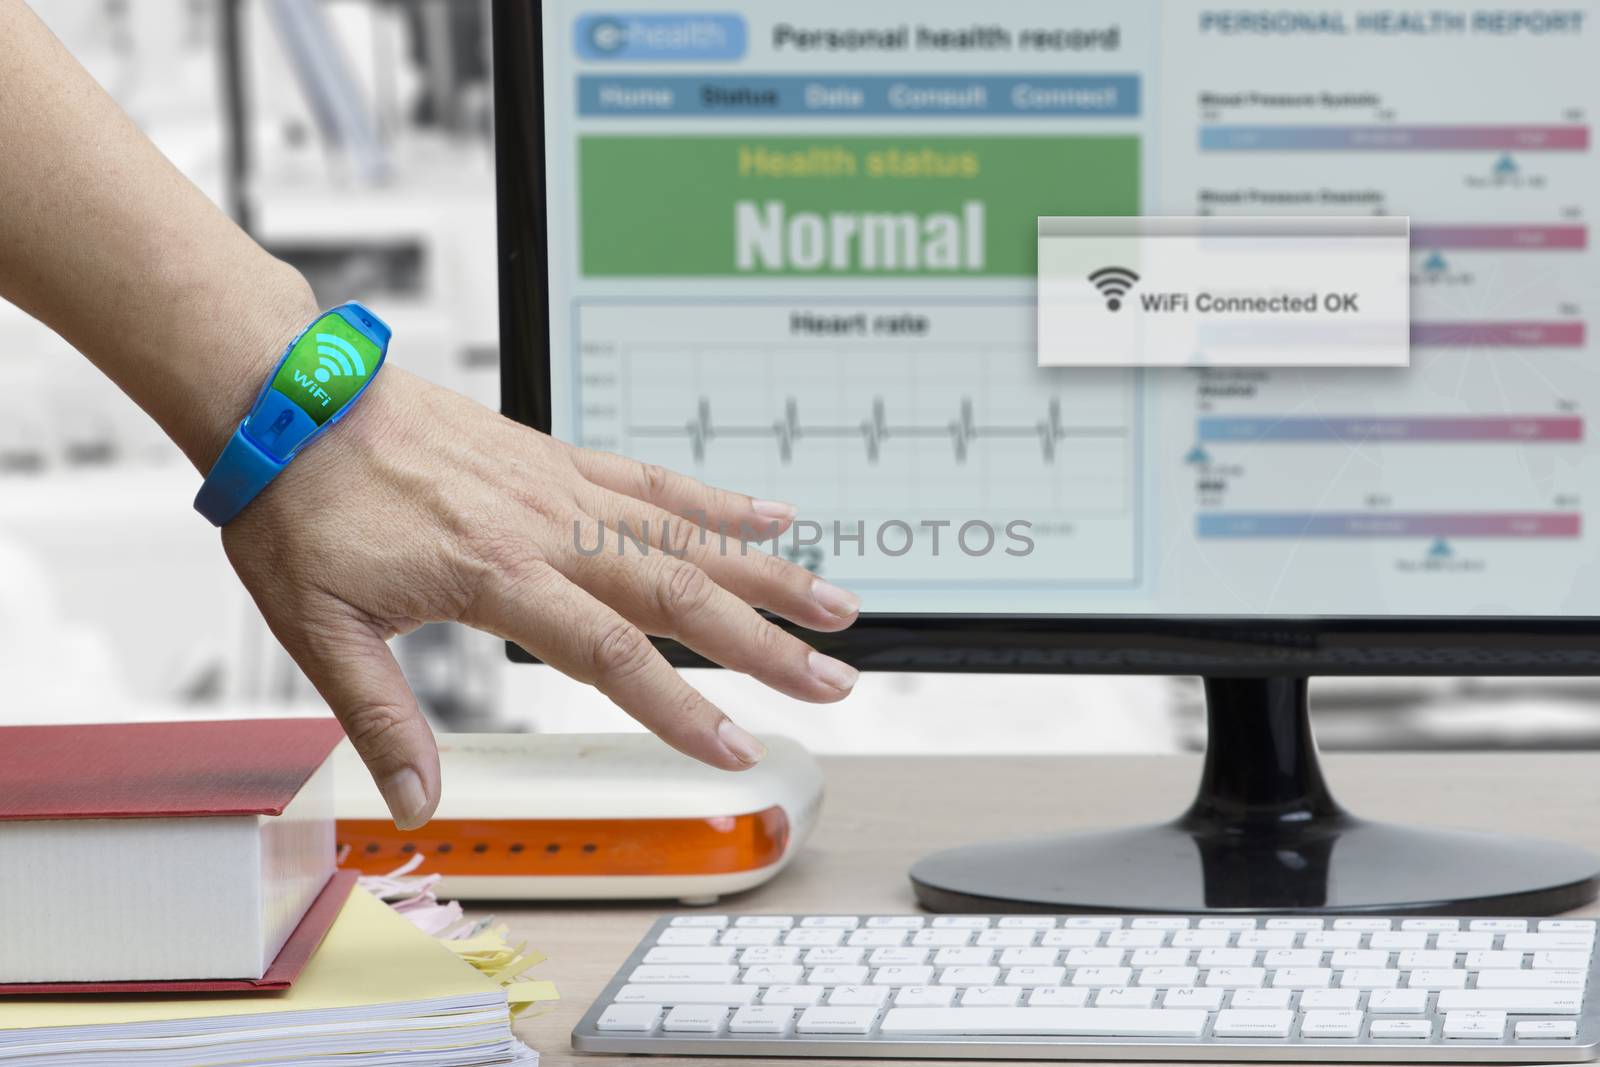 Health technology using wireless device to transfer patient information to electronic medical record system.